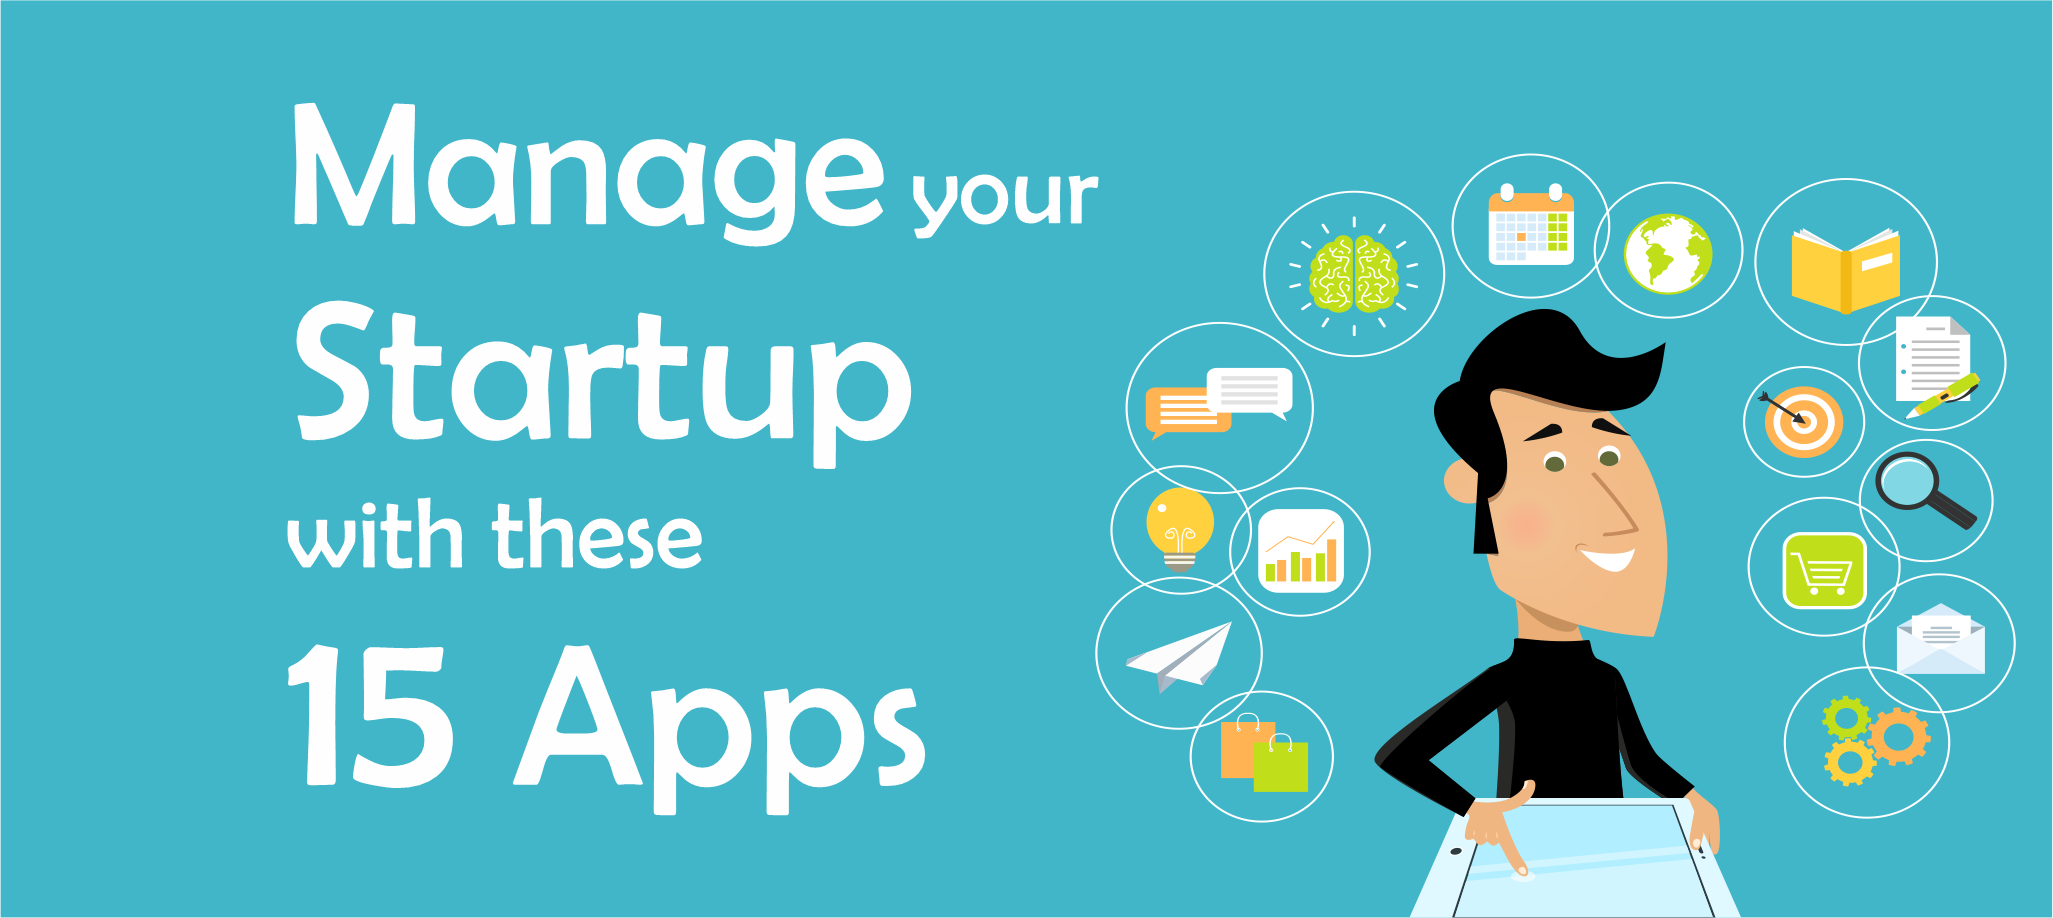 manage your startup with these 15 productivity apps